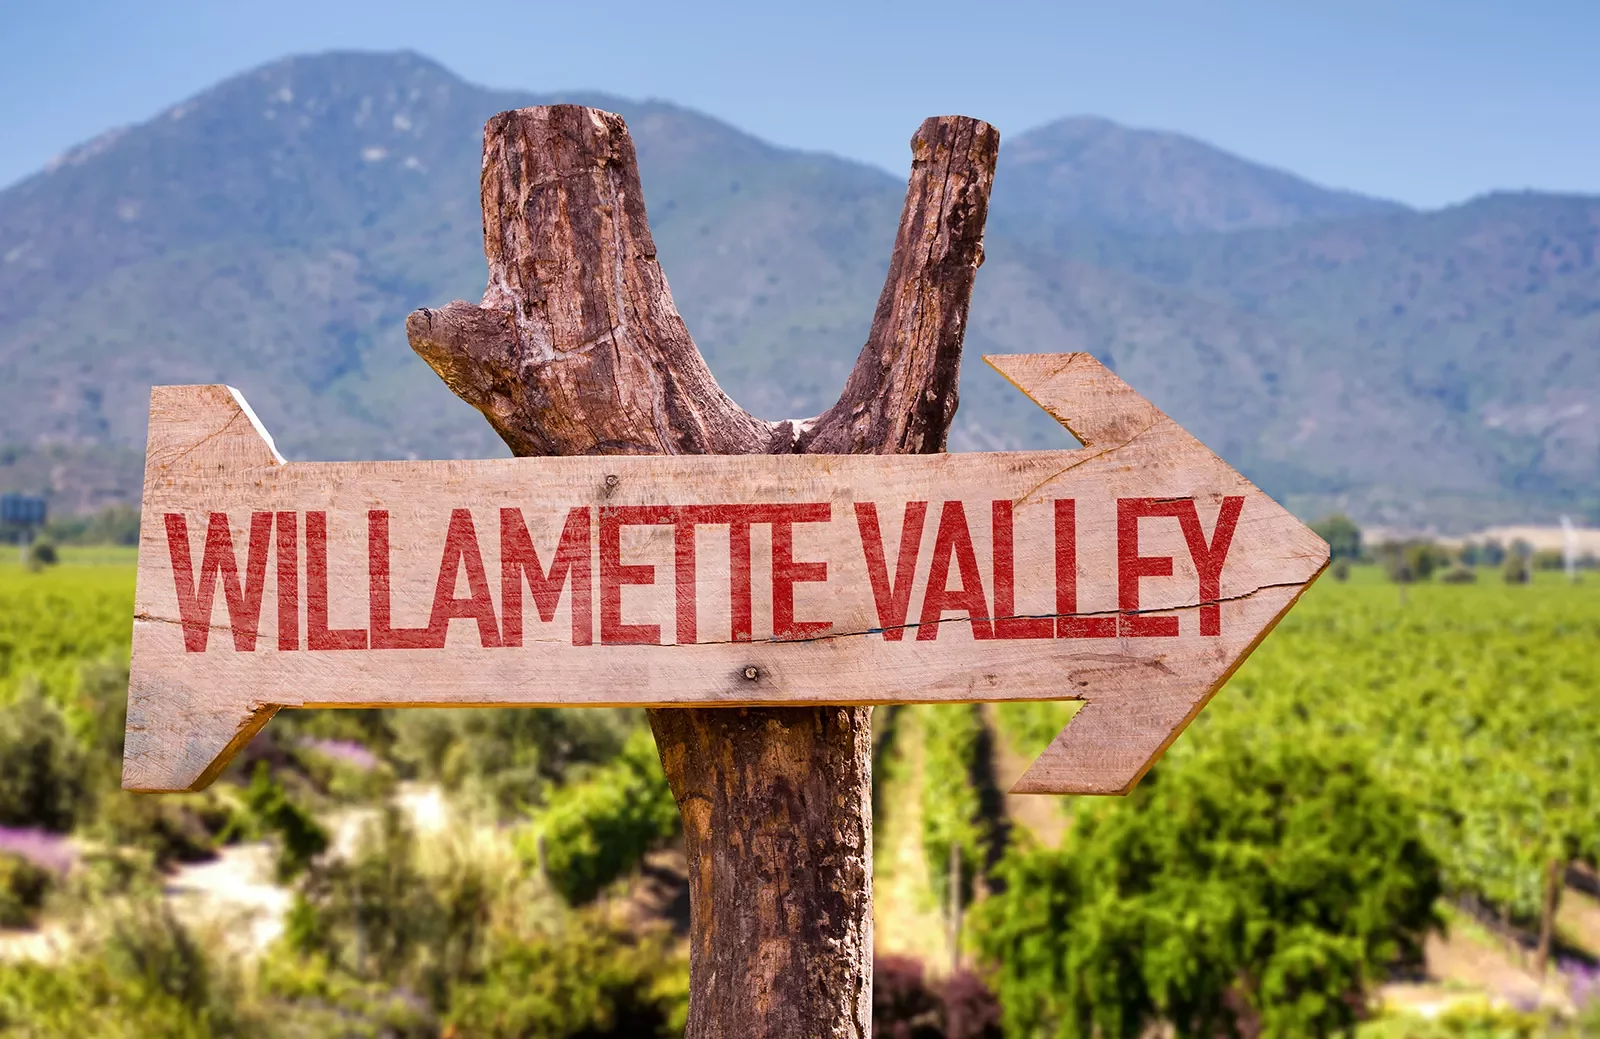 Wooden sign labeled &quot;WILLAMETTE VALLEY&quot;.